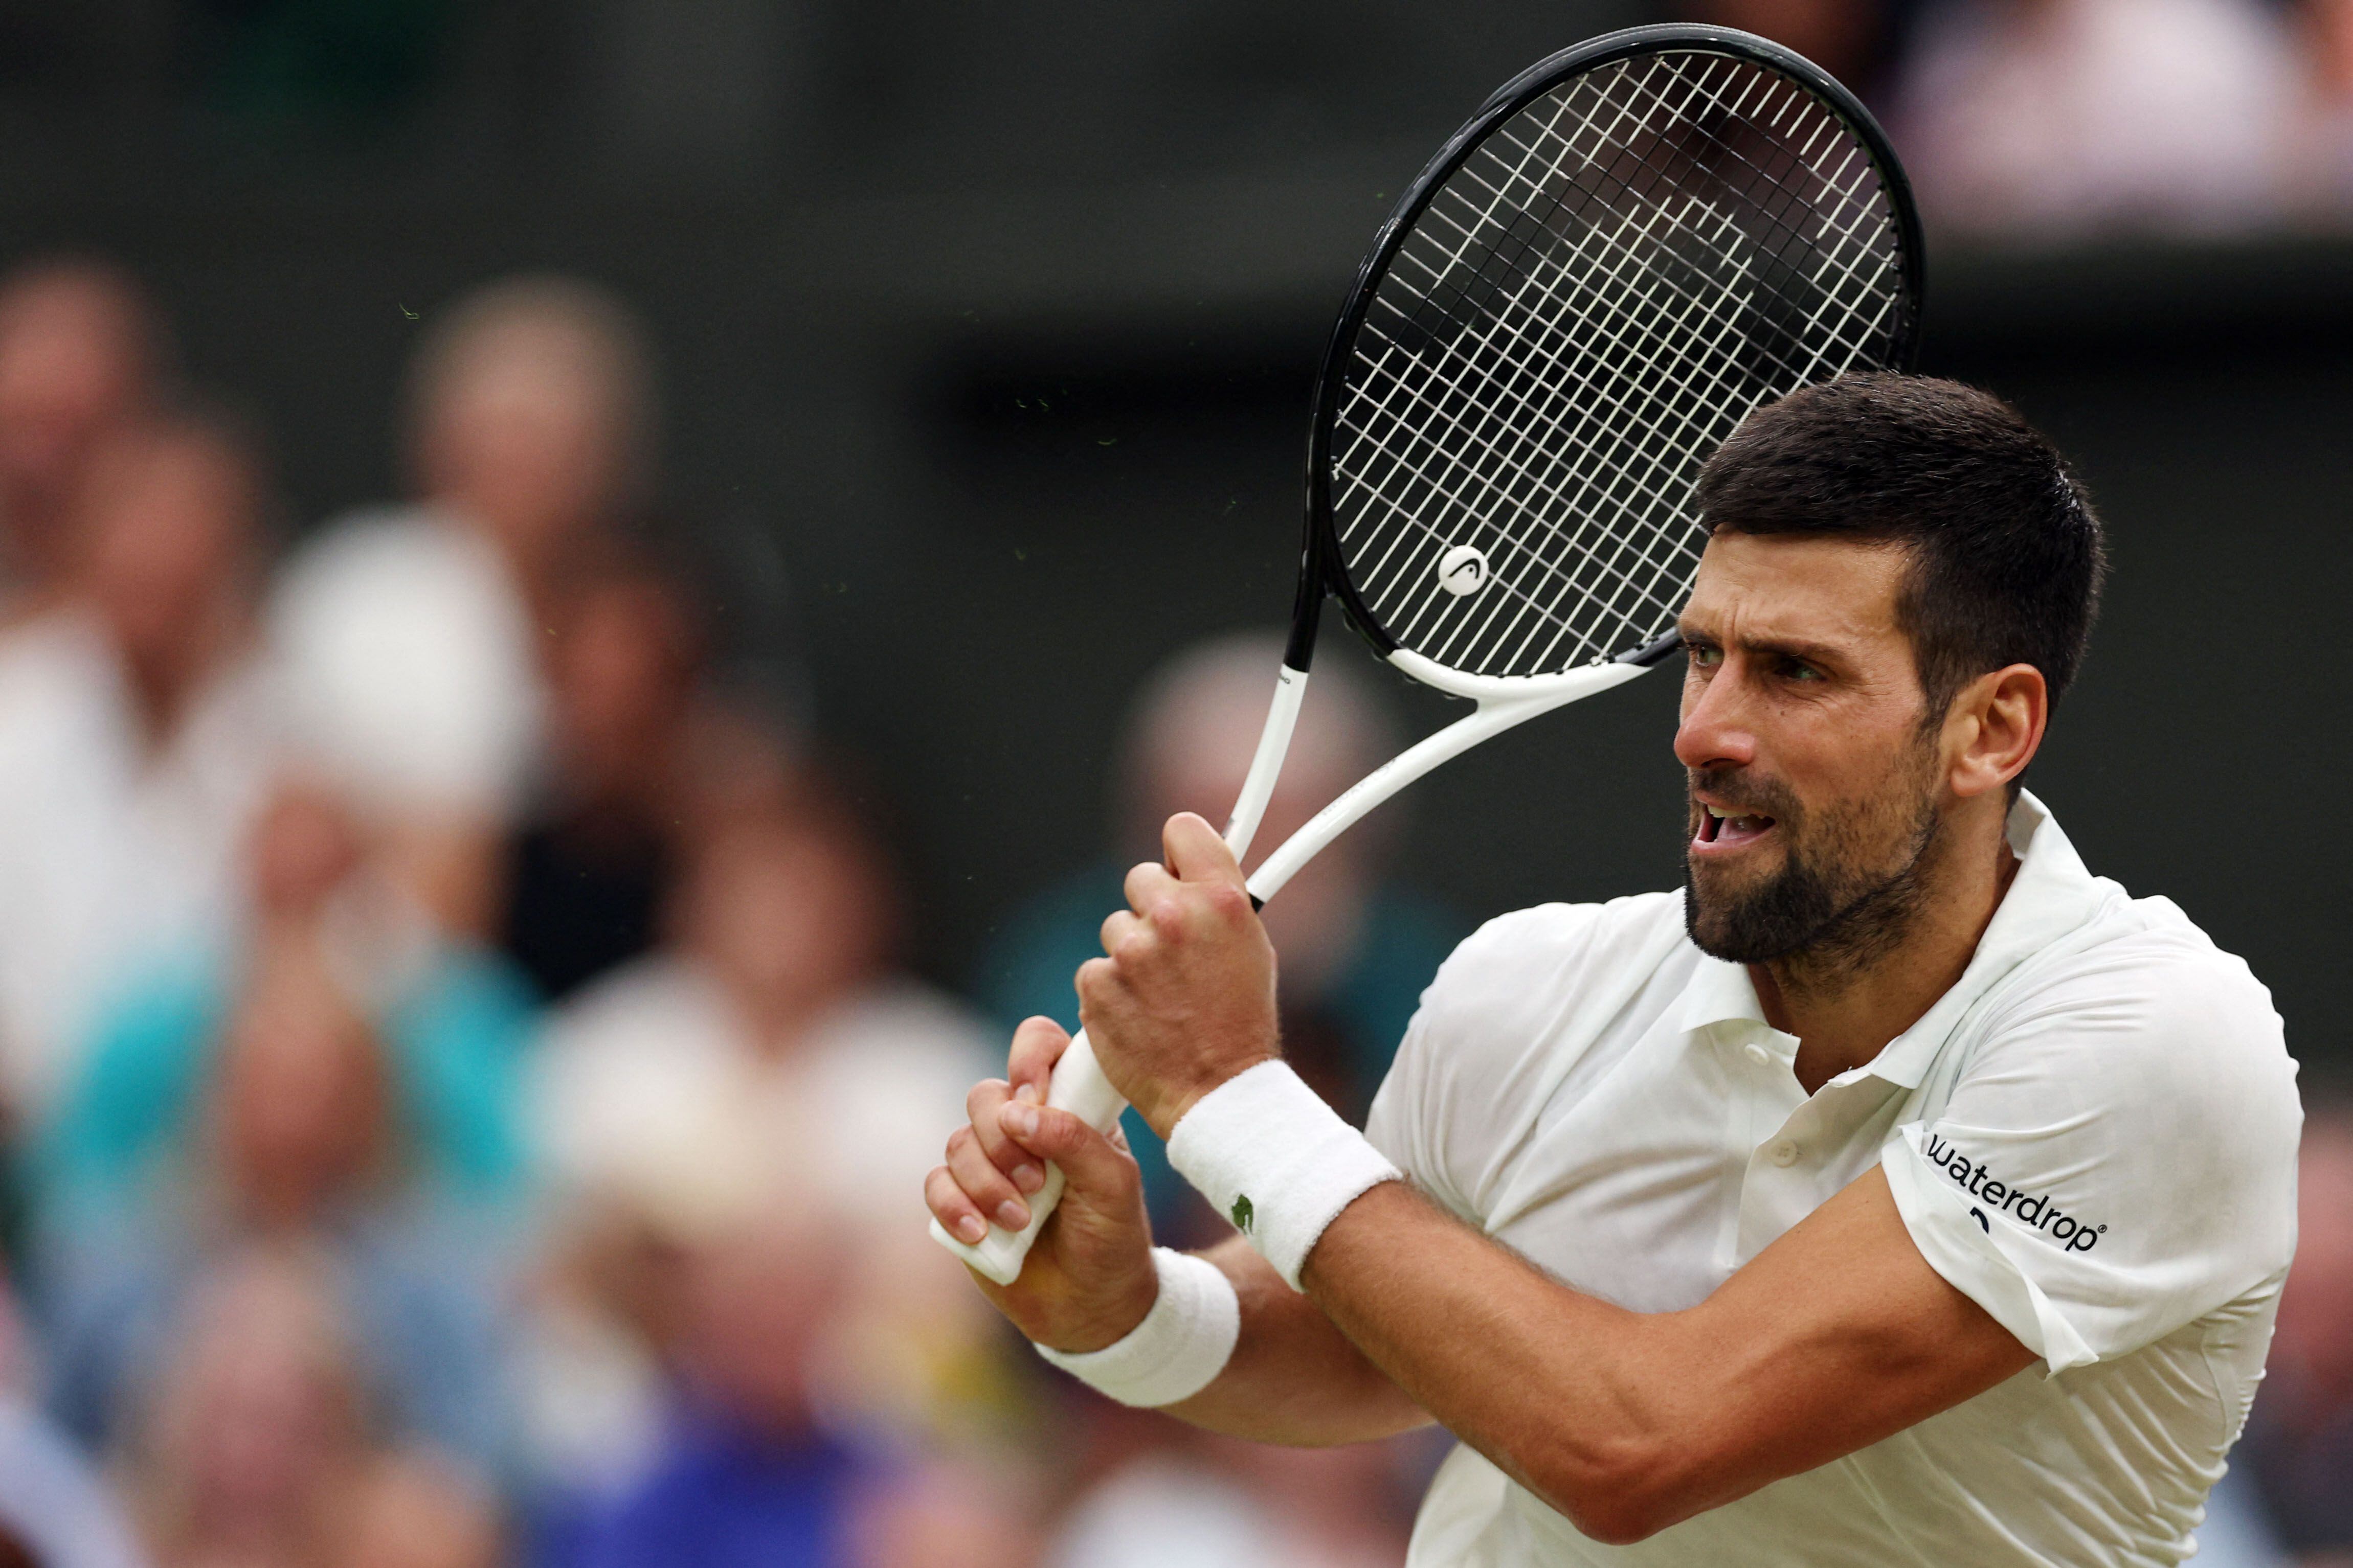 Serbia's Novak Djokovic returns the ball to Italy's Jannik Sinner during their men's singles semi-finals tennis match on the twelfth day of the 2023 Wimbledon Championships at The All England Lawn Tennis Club in Wimbledon, southwest London, on July 14, 2023. (Photo by Adrian DENNIS / AFP) / RESTRICTED TO EDITORIAL USE